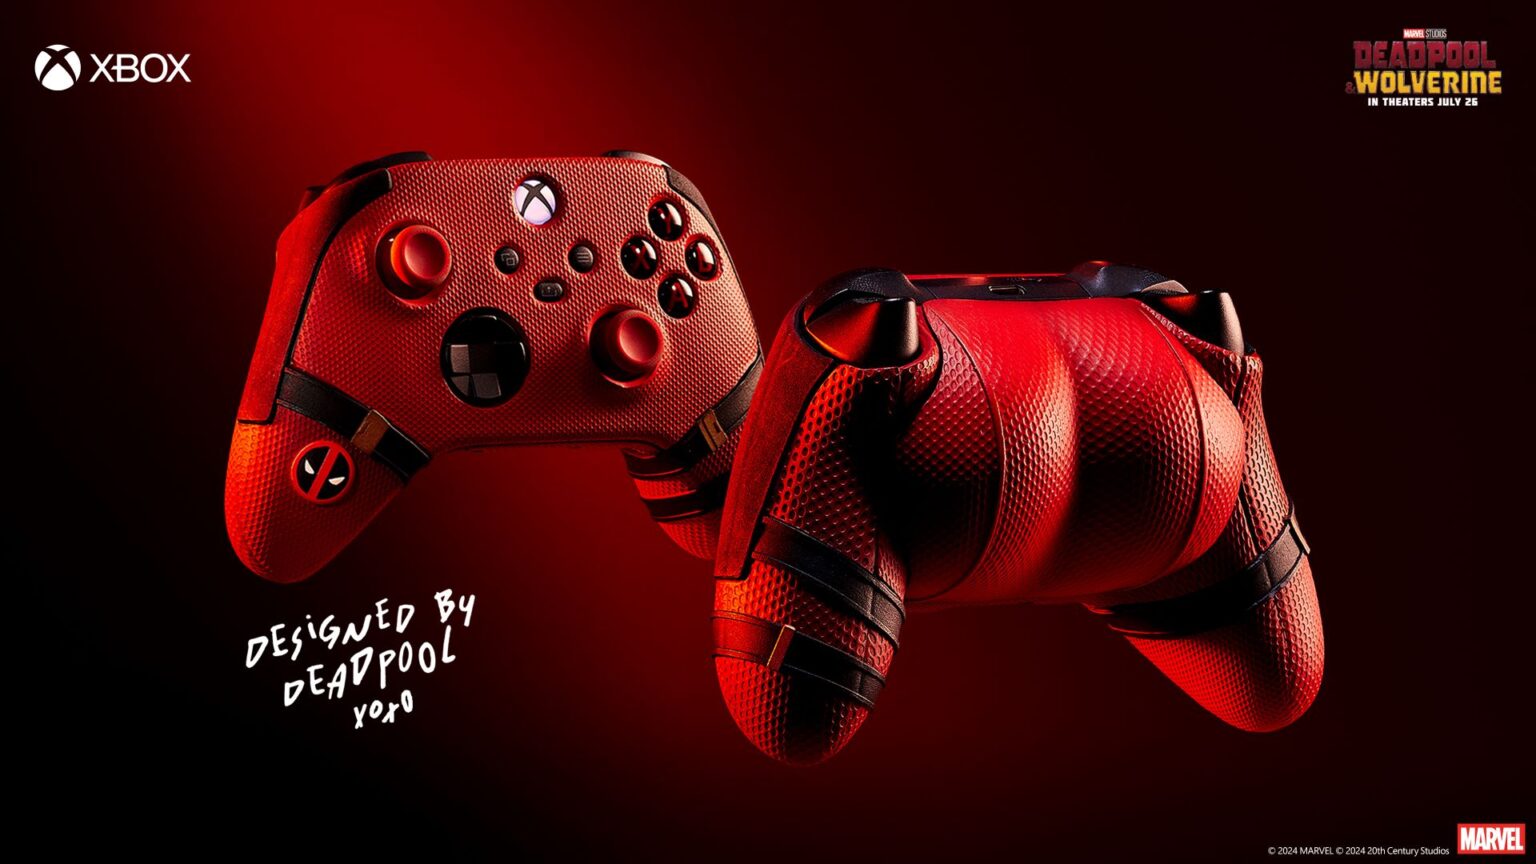 Try your luck: Microsoft is raffling off a one-of-a-kind Xbox Series X console and two gamepads in the shape of Deadpool's... buttocks